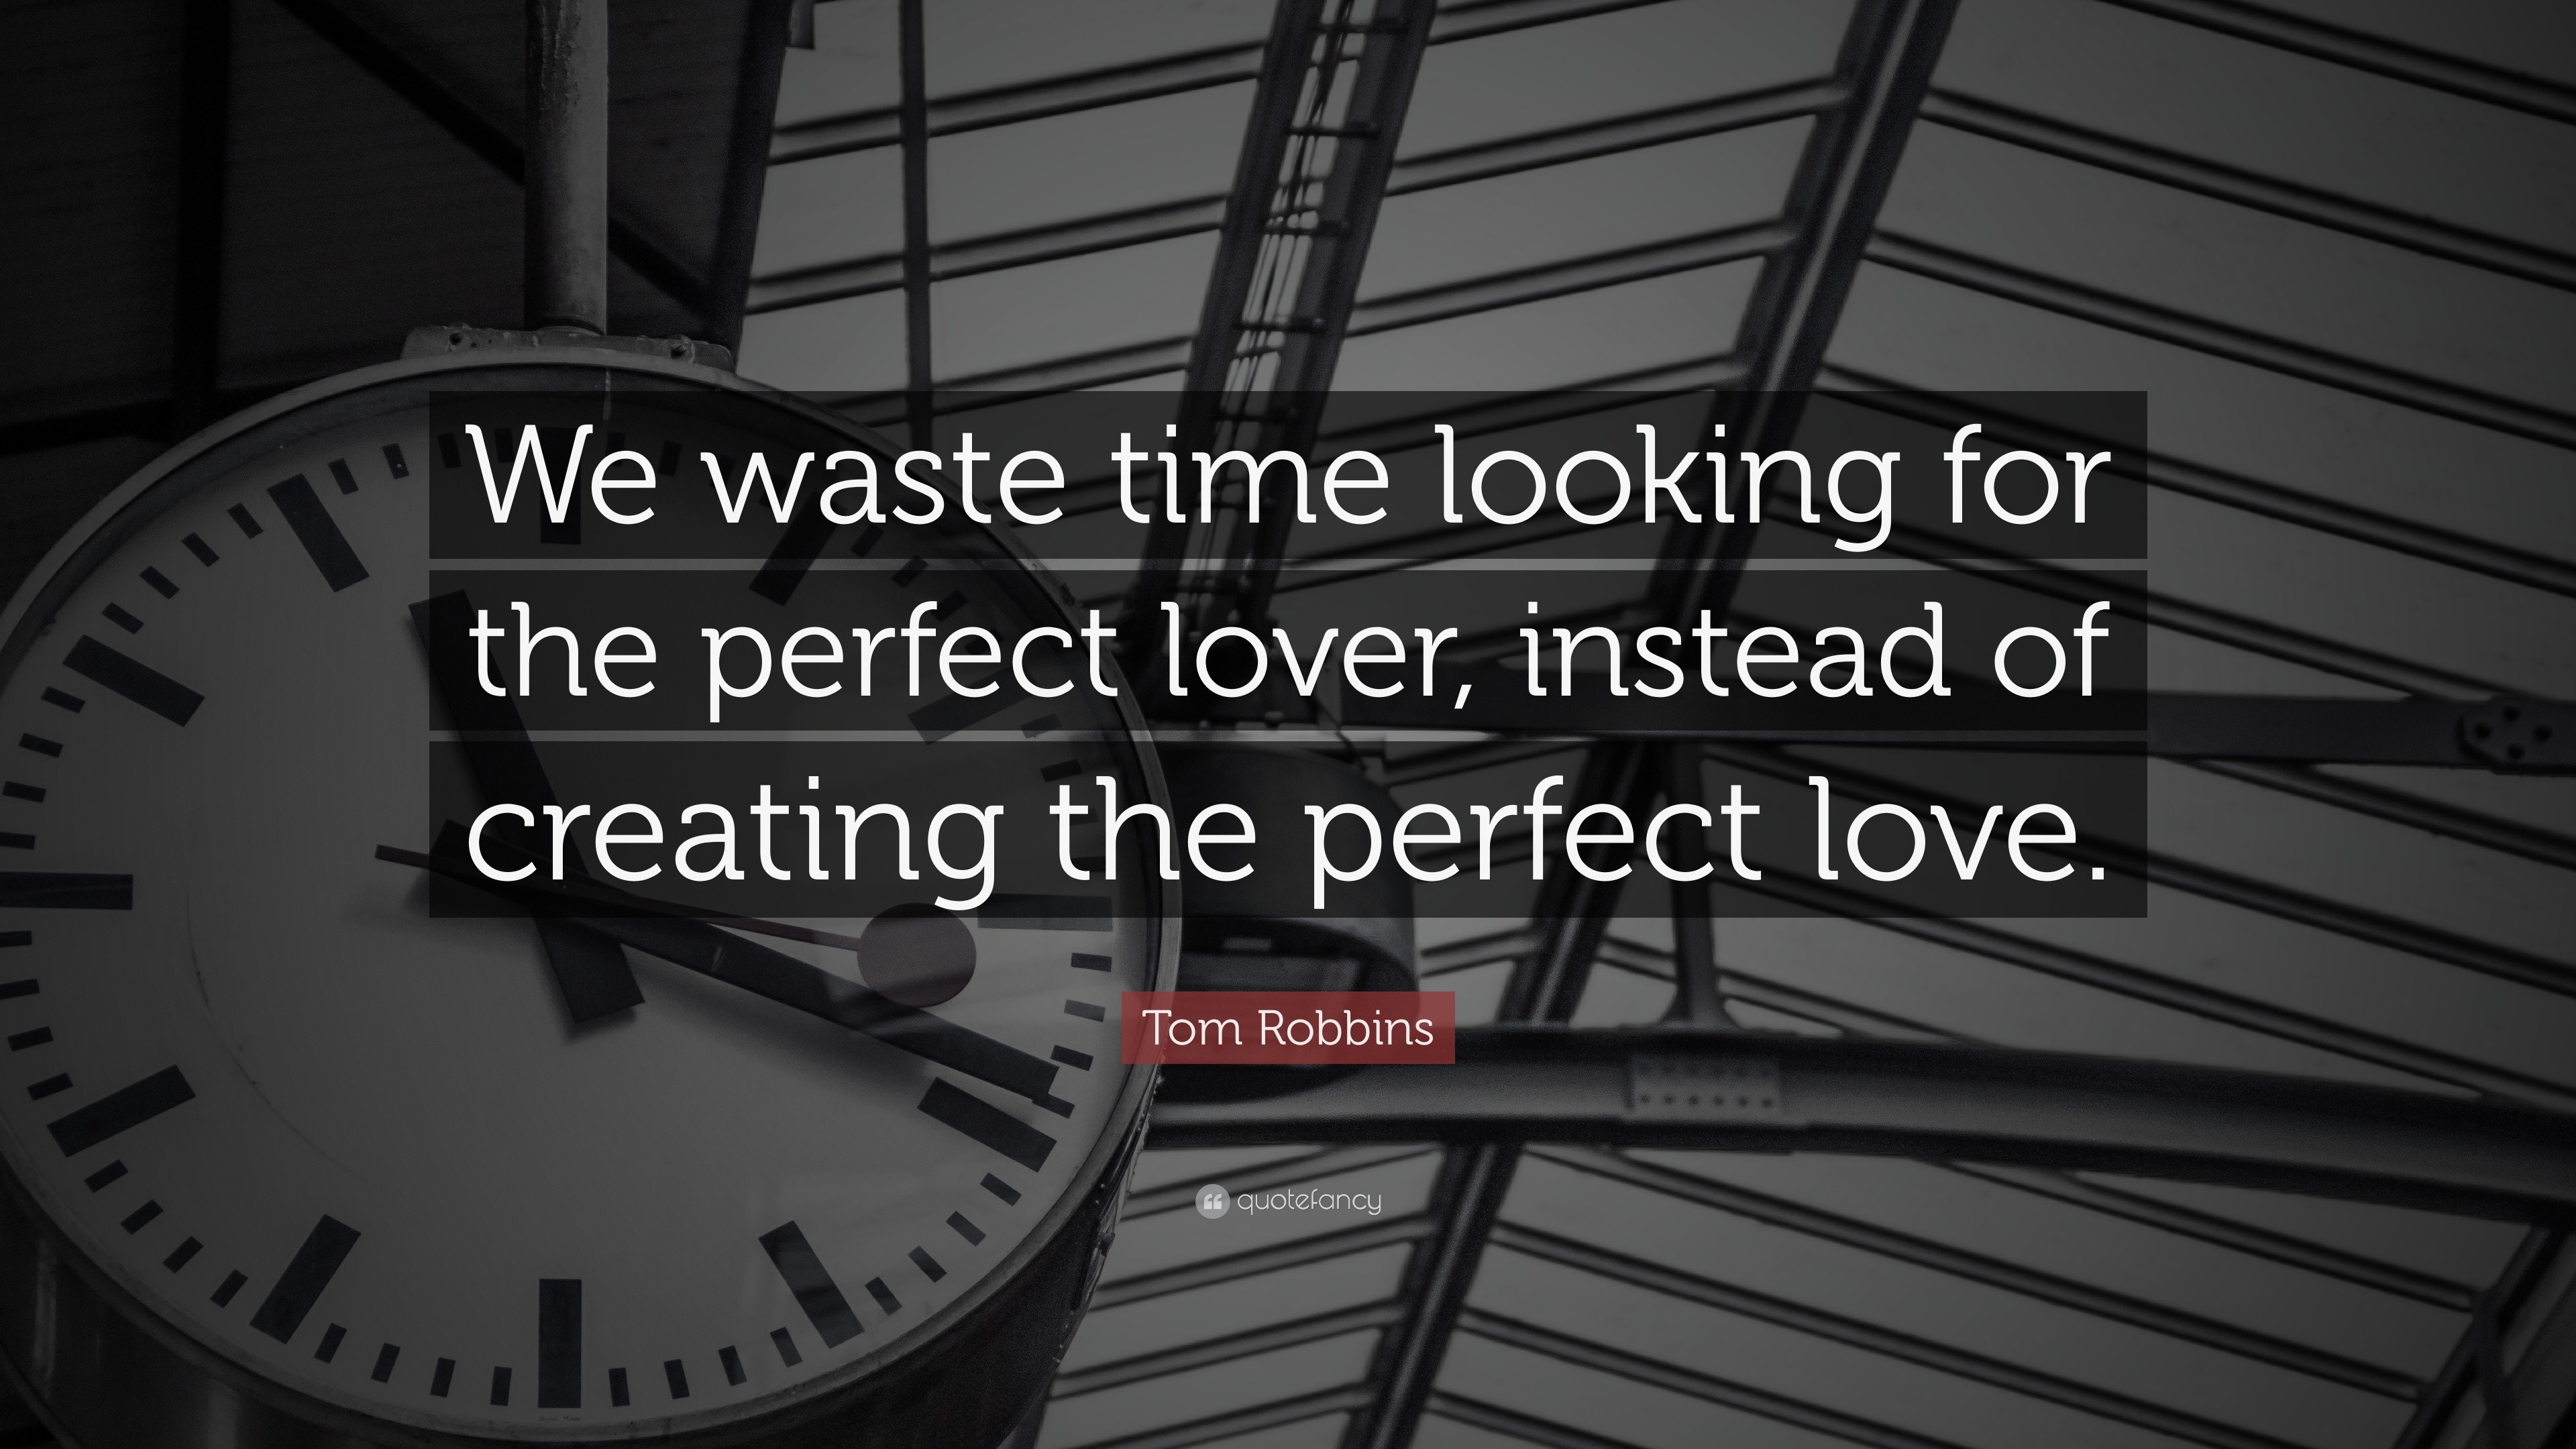 Time Quotes “We waste time looking for the perfect lover instead of creating